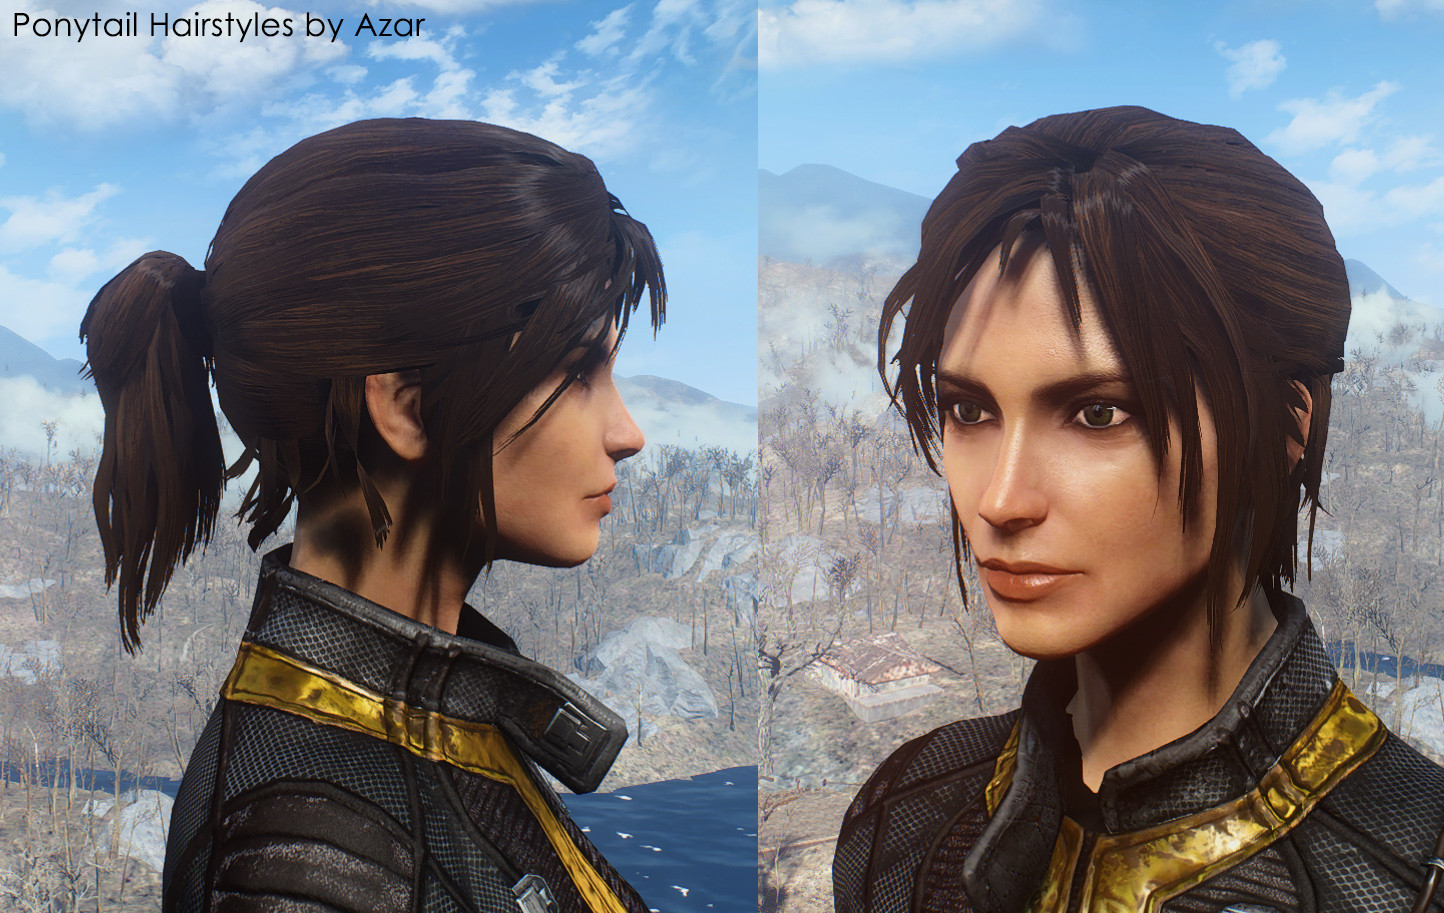 Fallout 4 Female Hairstyles
 Ponytail Hairstyles by Azar FO4 Mod